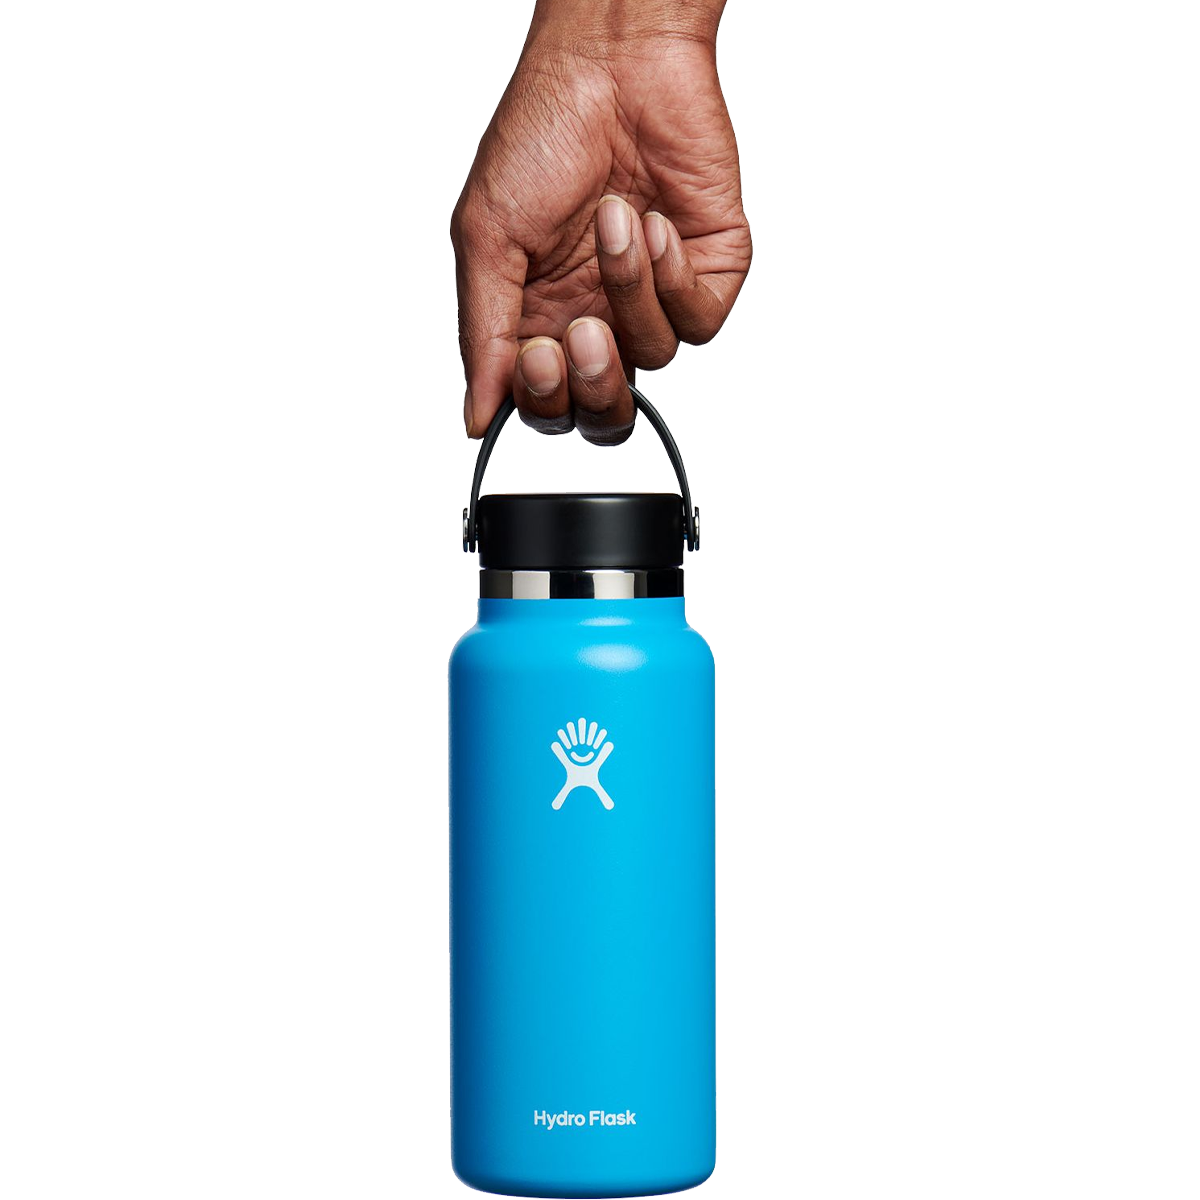 New hydro just arrived! : r/Hydroflask